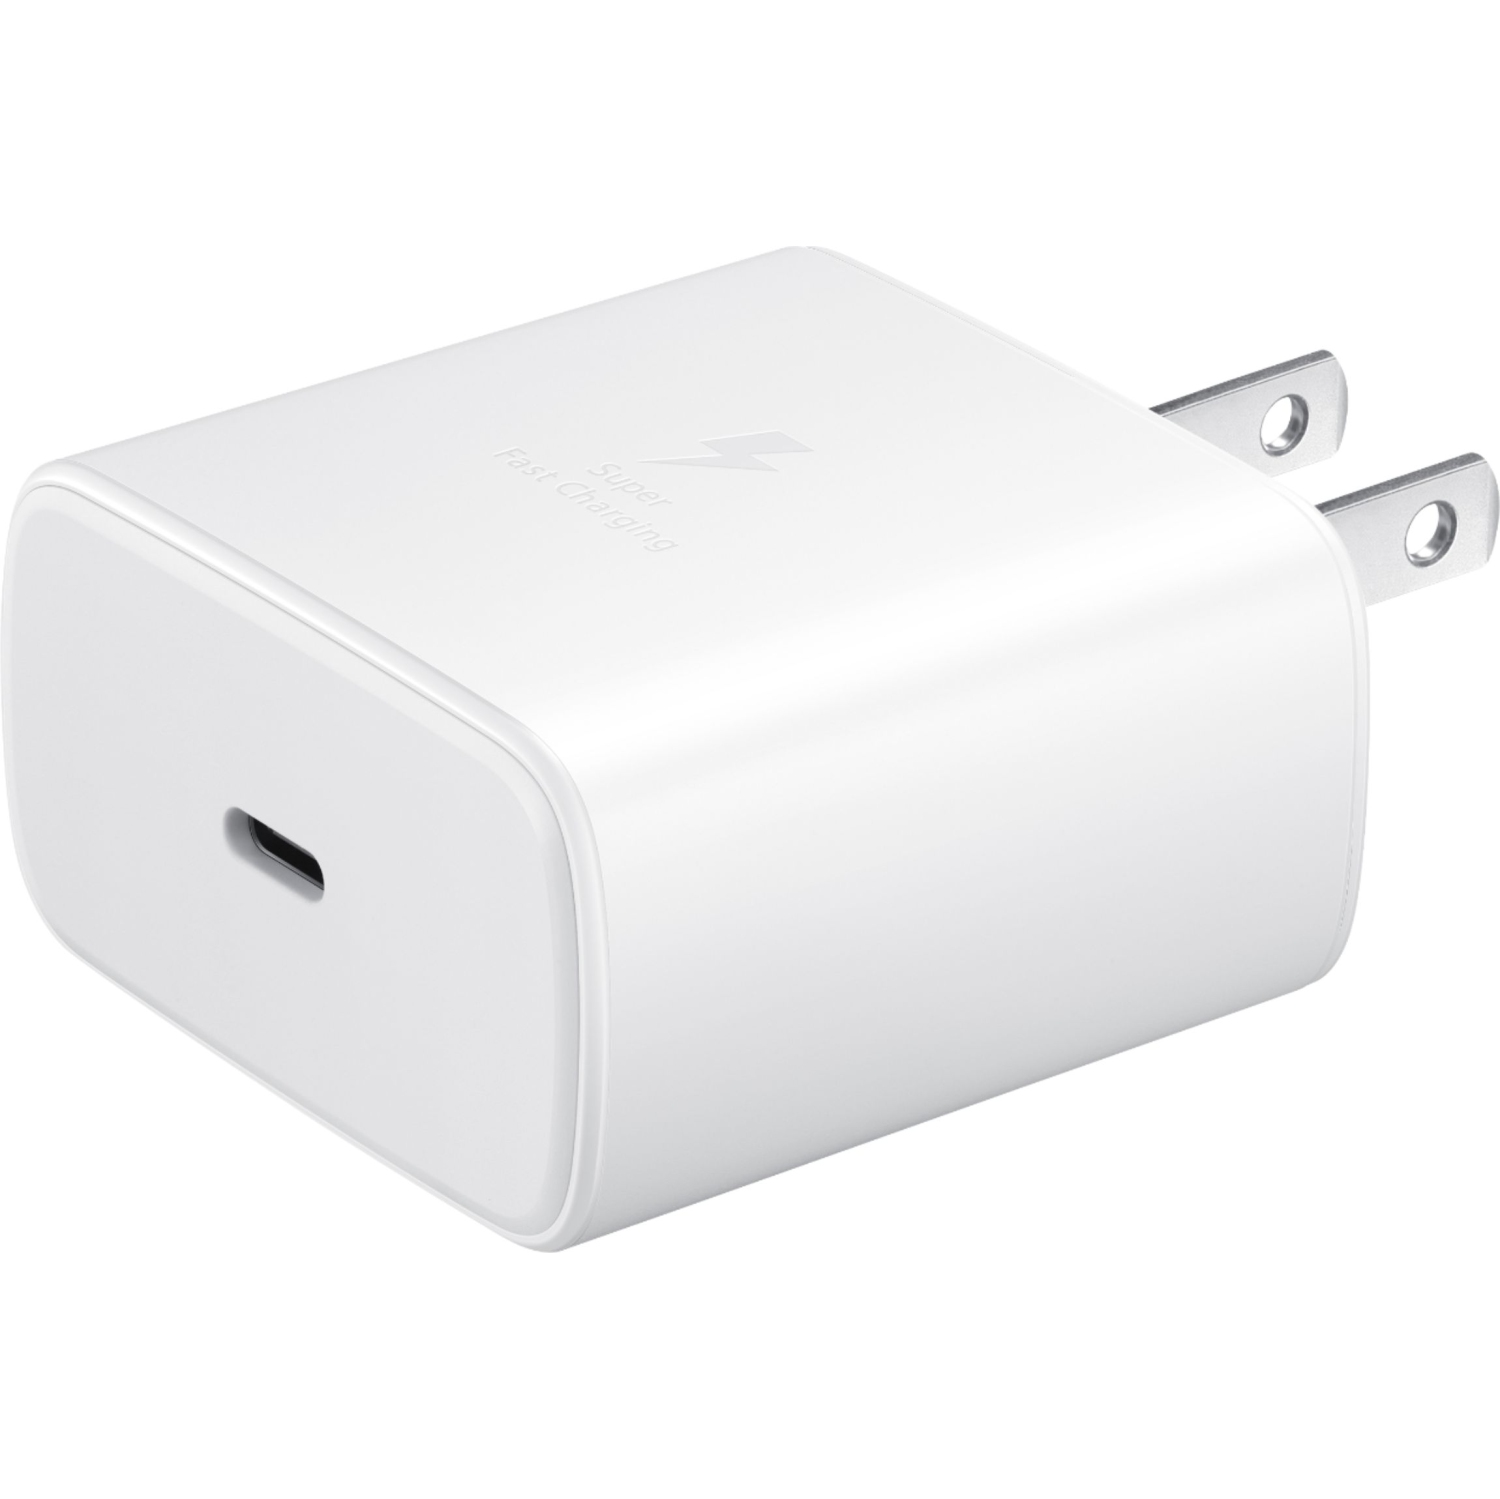 45W USB-C PD PPS Super Fast Charging Wall Charger Adapter for Samsung Galaxy S10 S20 Note 10 20 Ultra Google Moto LG, White